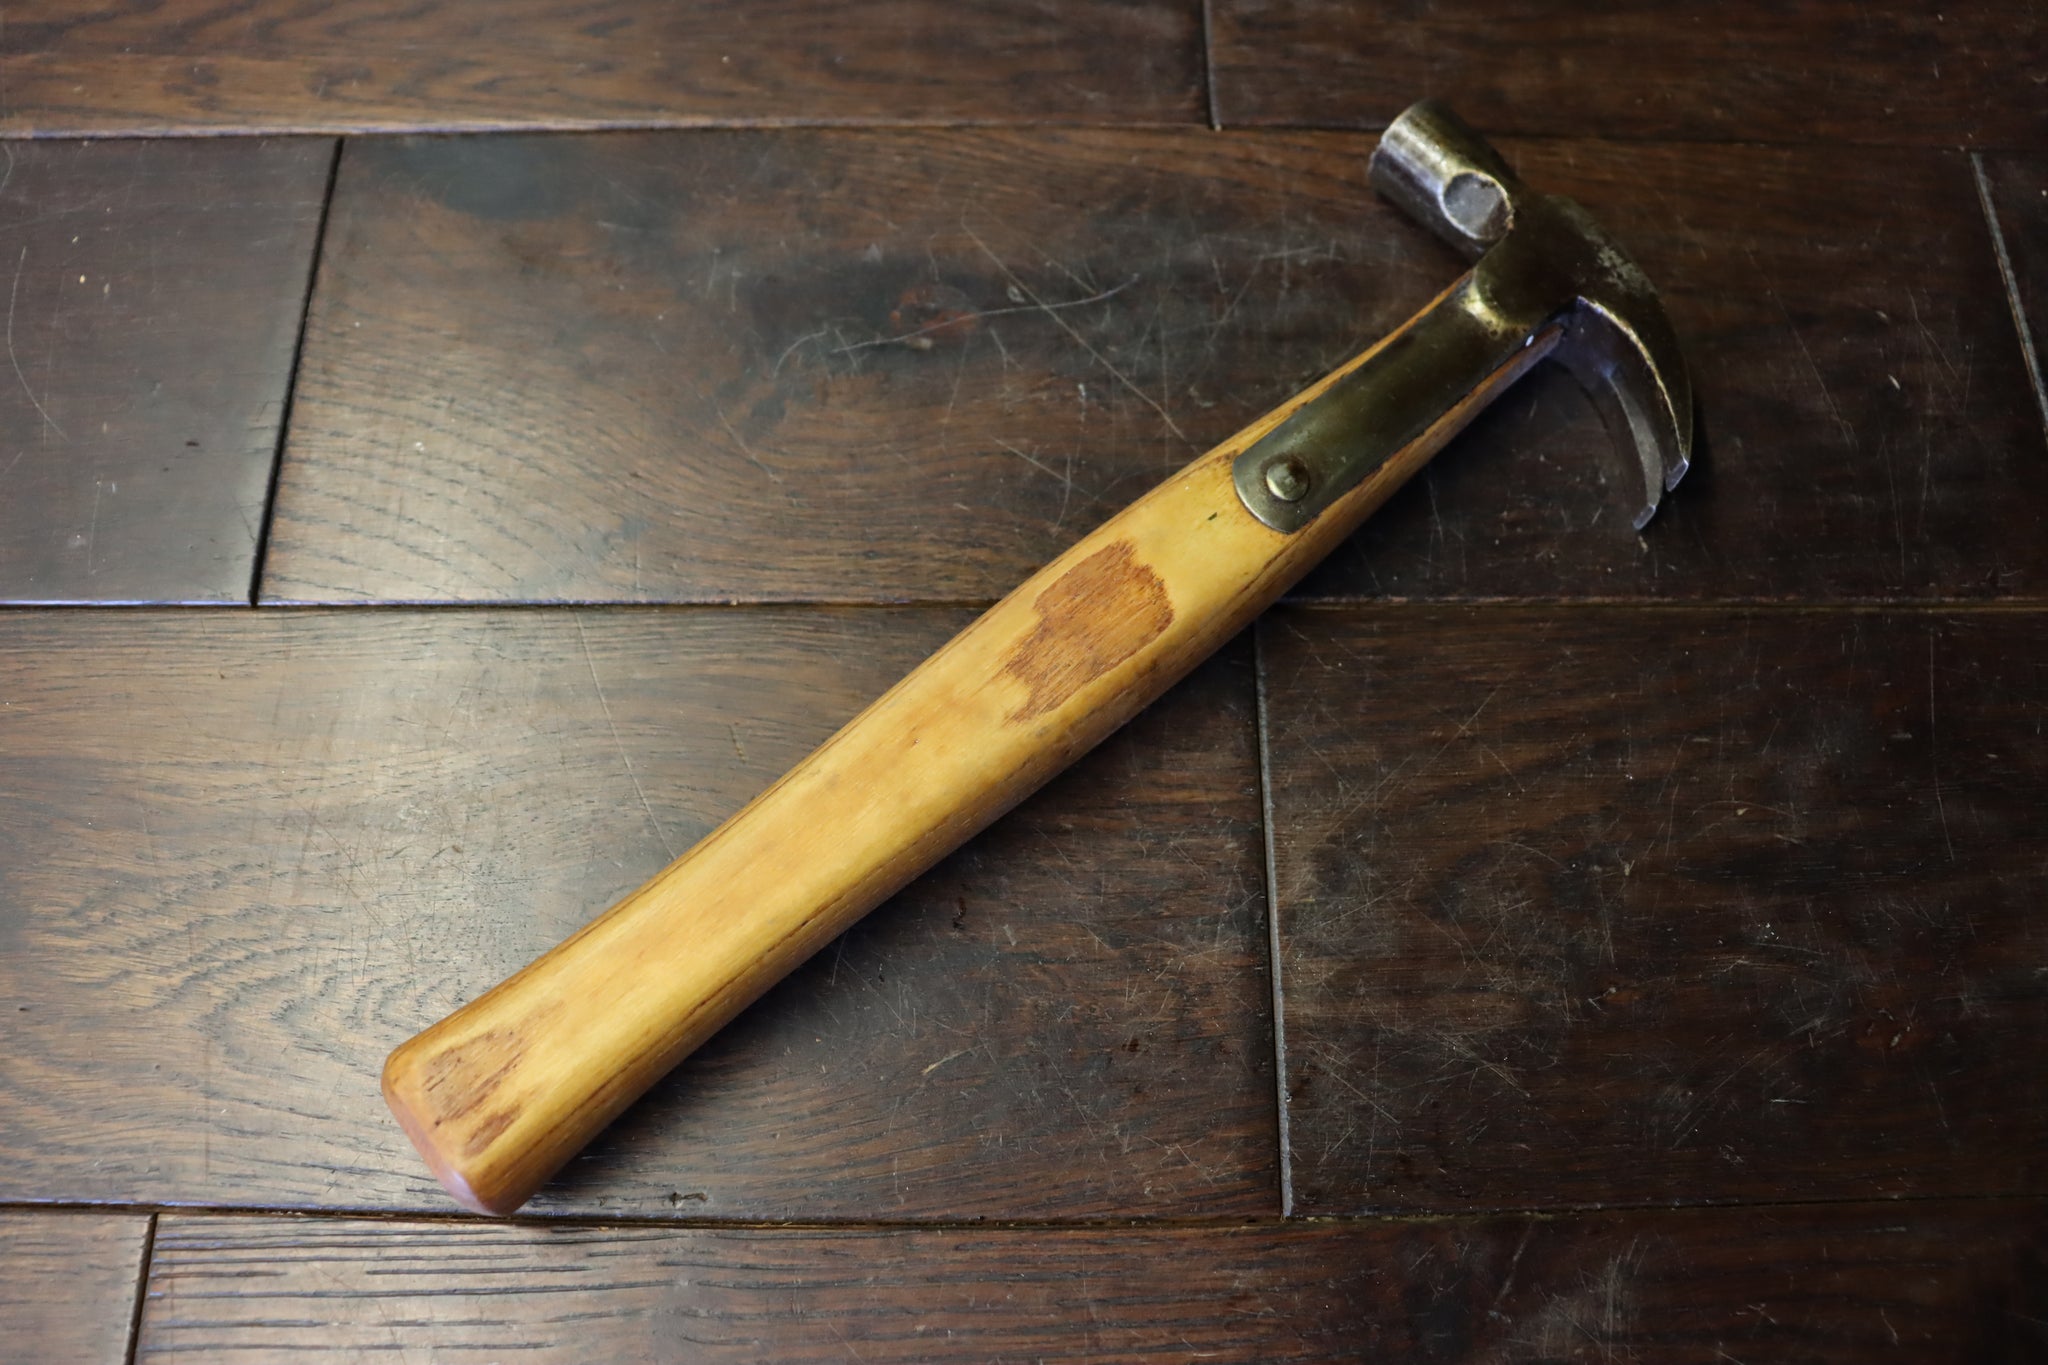 Strapped claw hammer. Beautifully made round head flat face. 9ozs. 46267